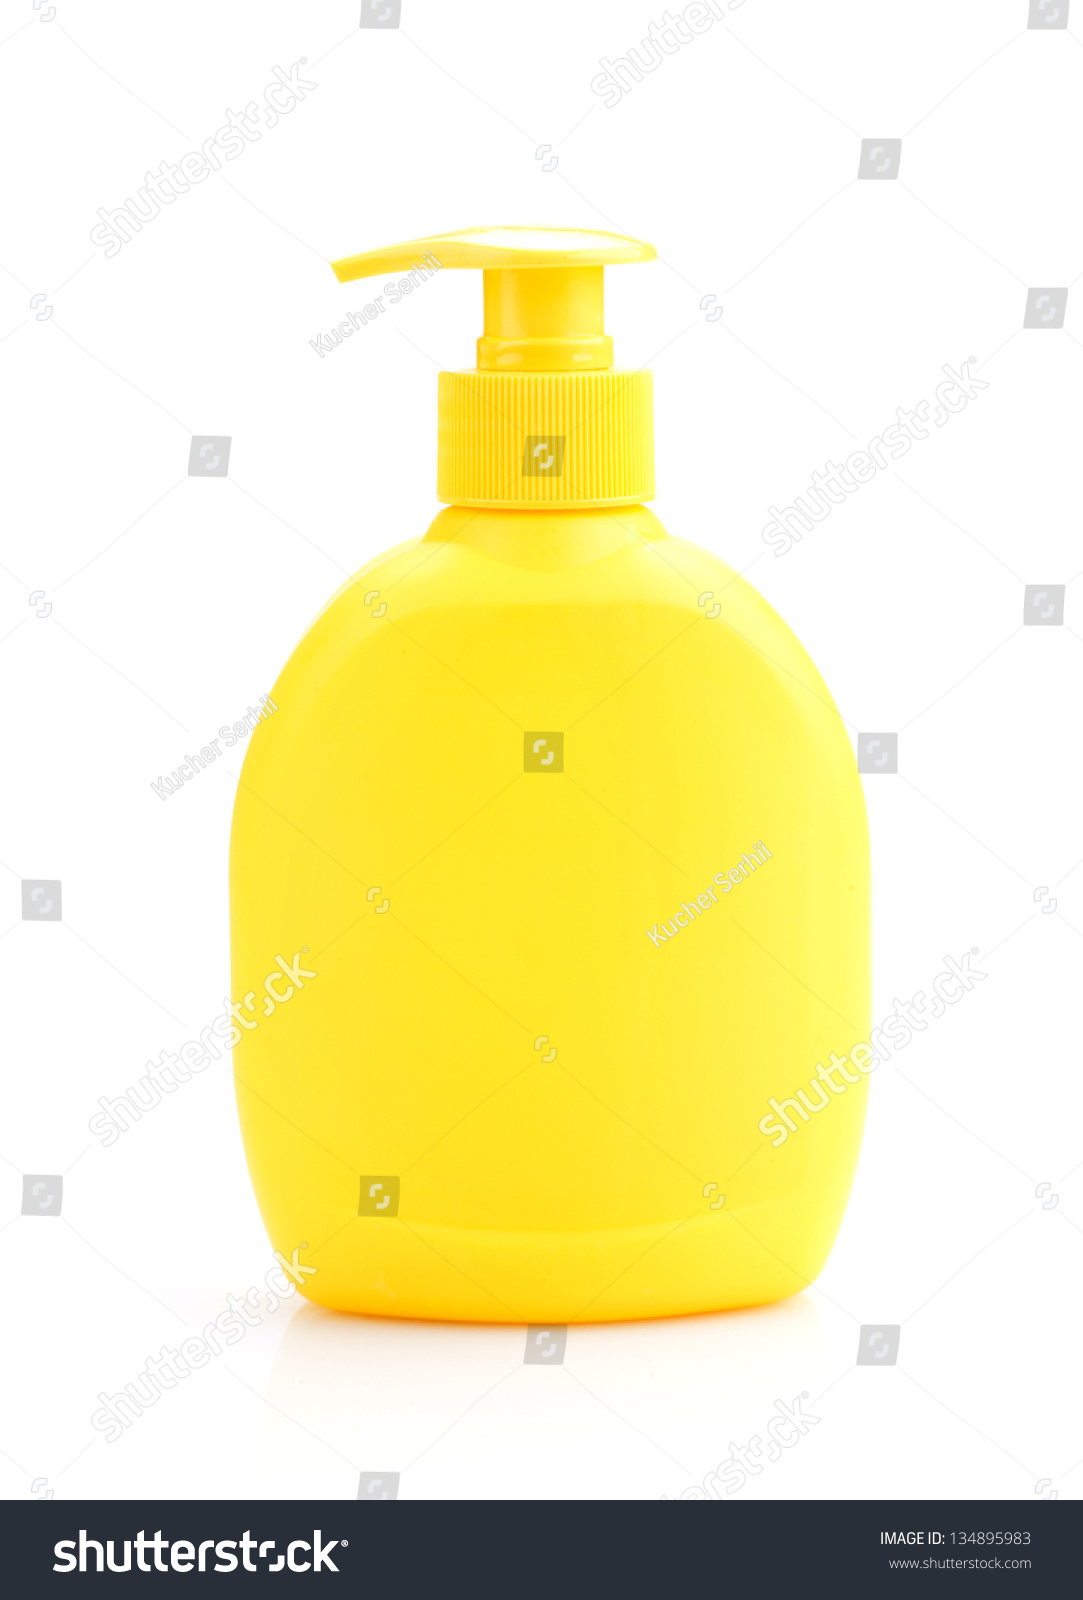 Download Liquid Soap Yellow Clear Pump Bottle Stock Photo Edit Now 134895983 Yellowimages Mockups